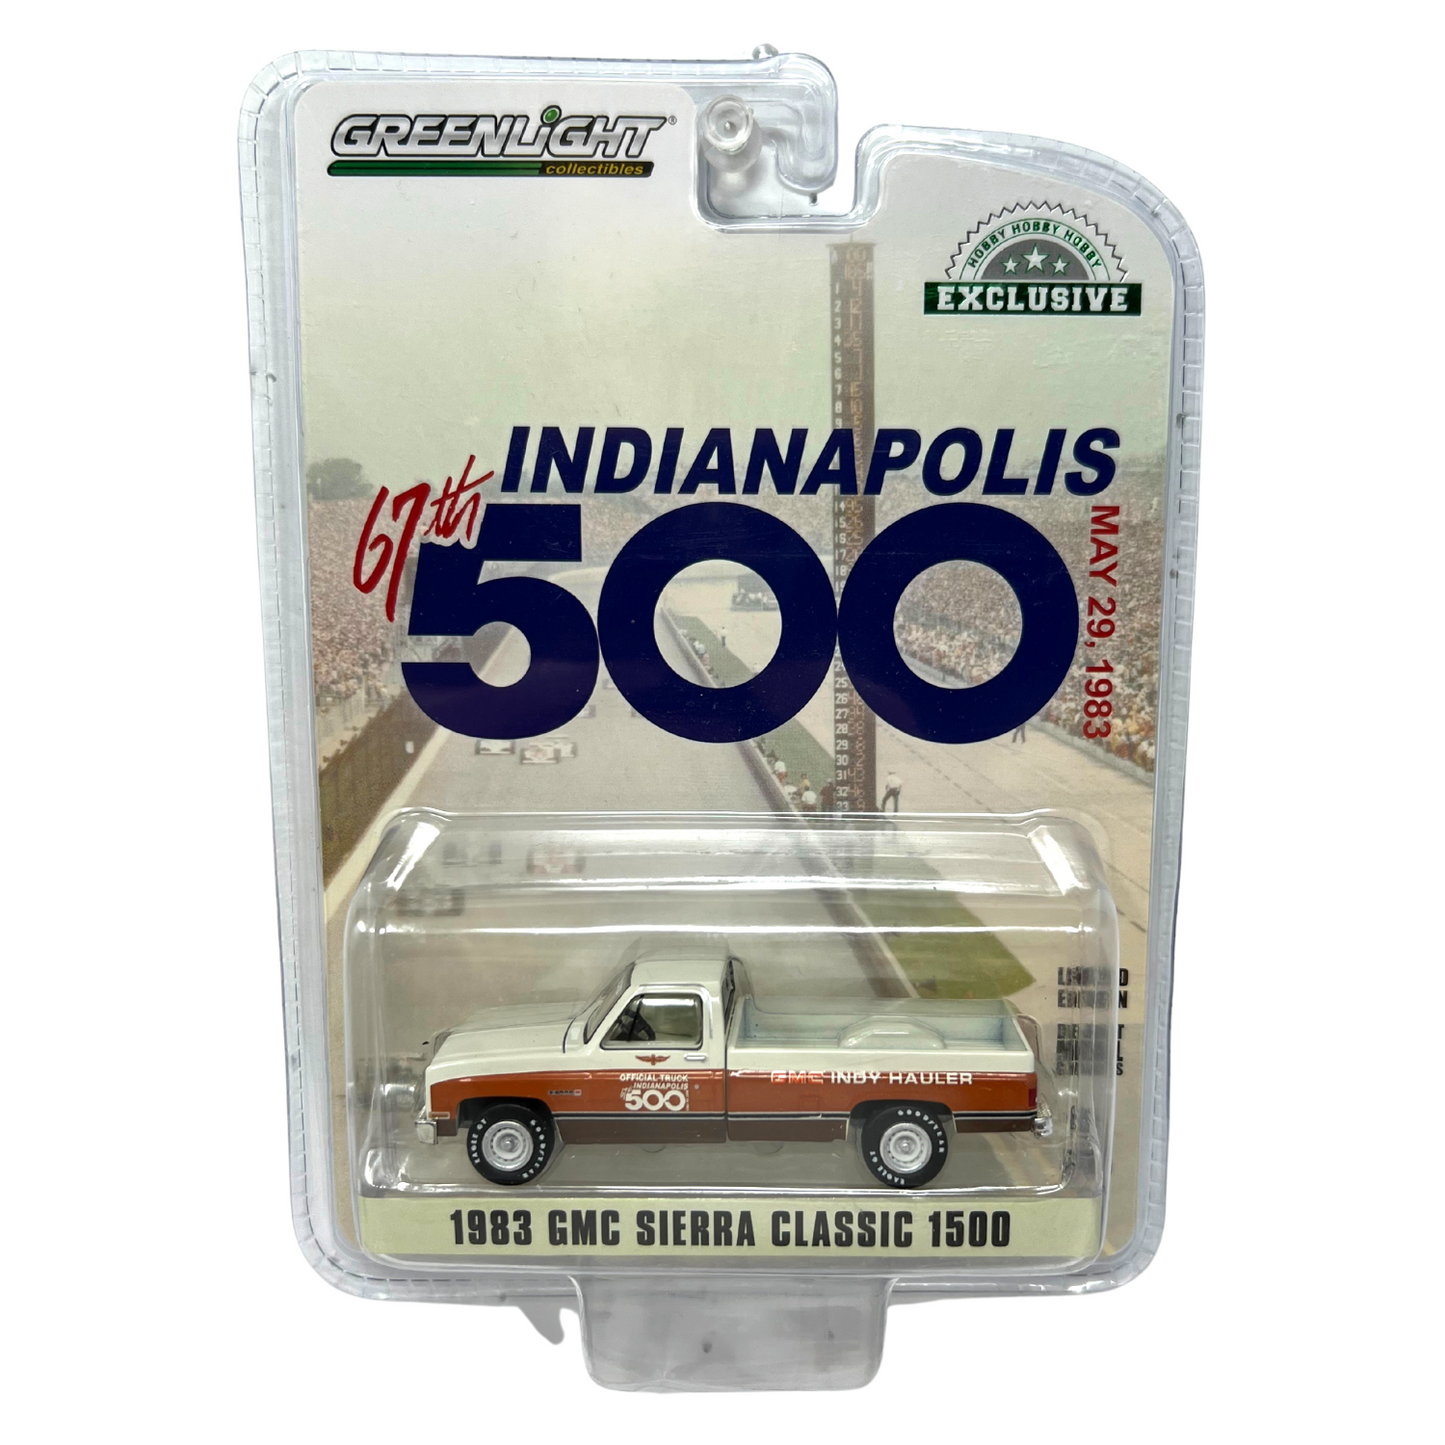 Greenlight Hobby 67th Indianapolis 500 1983 GMC Sierra Classic 1500 1:64 Diecast